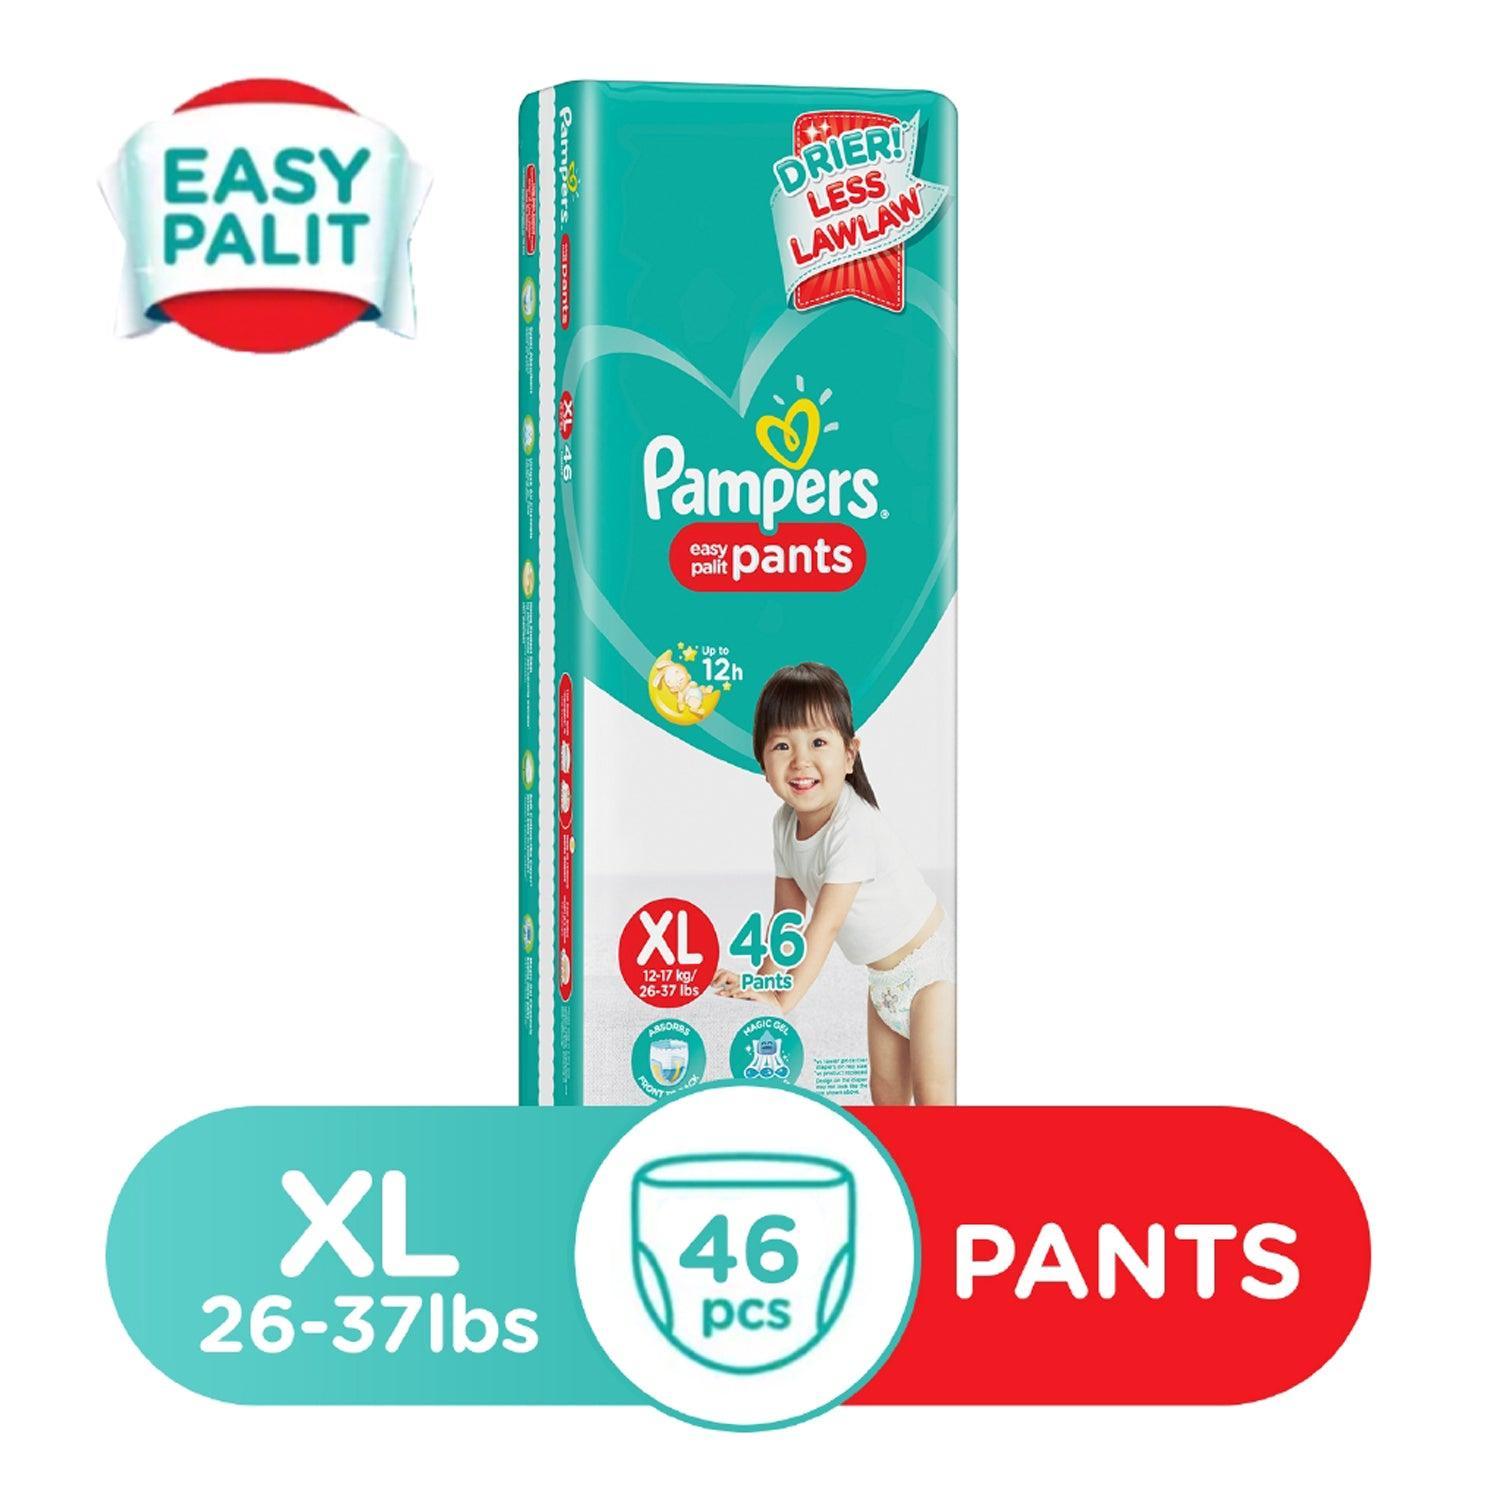 Pampers-Baby Dry Pants (Lotion with Aloe Vera) , XXL, 28 Pants